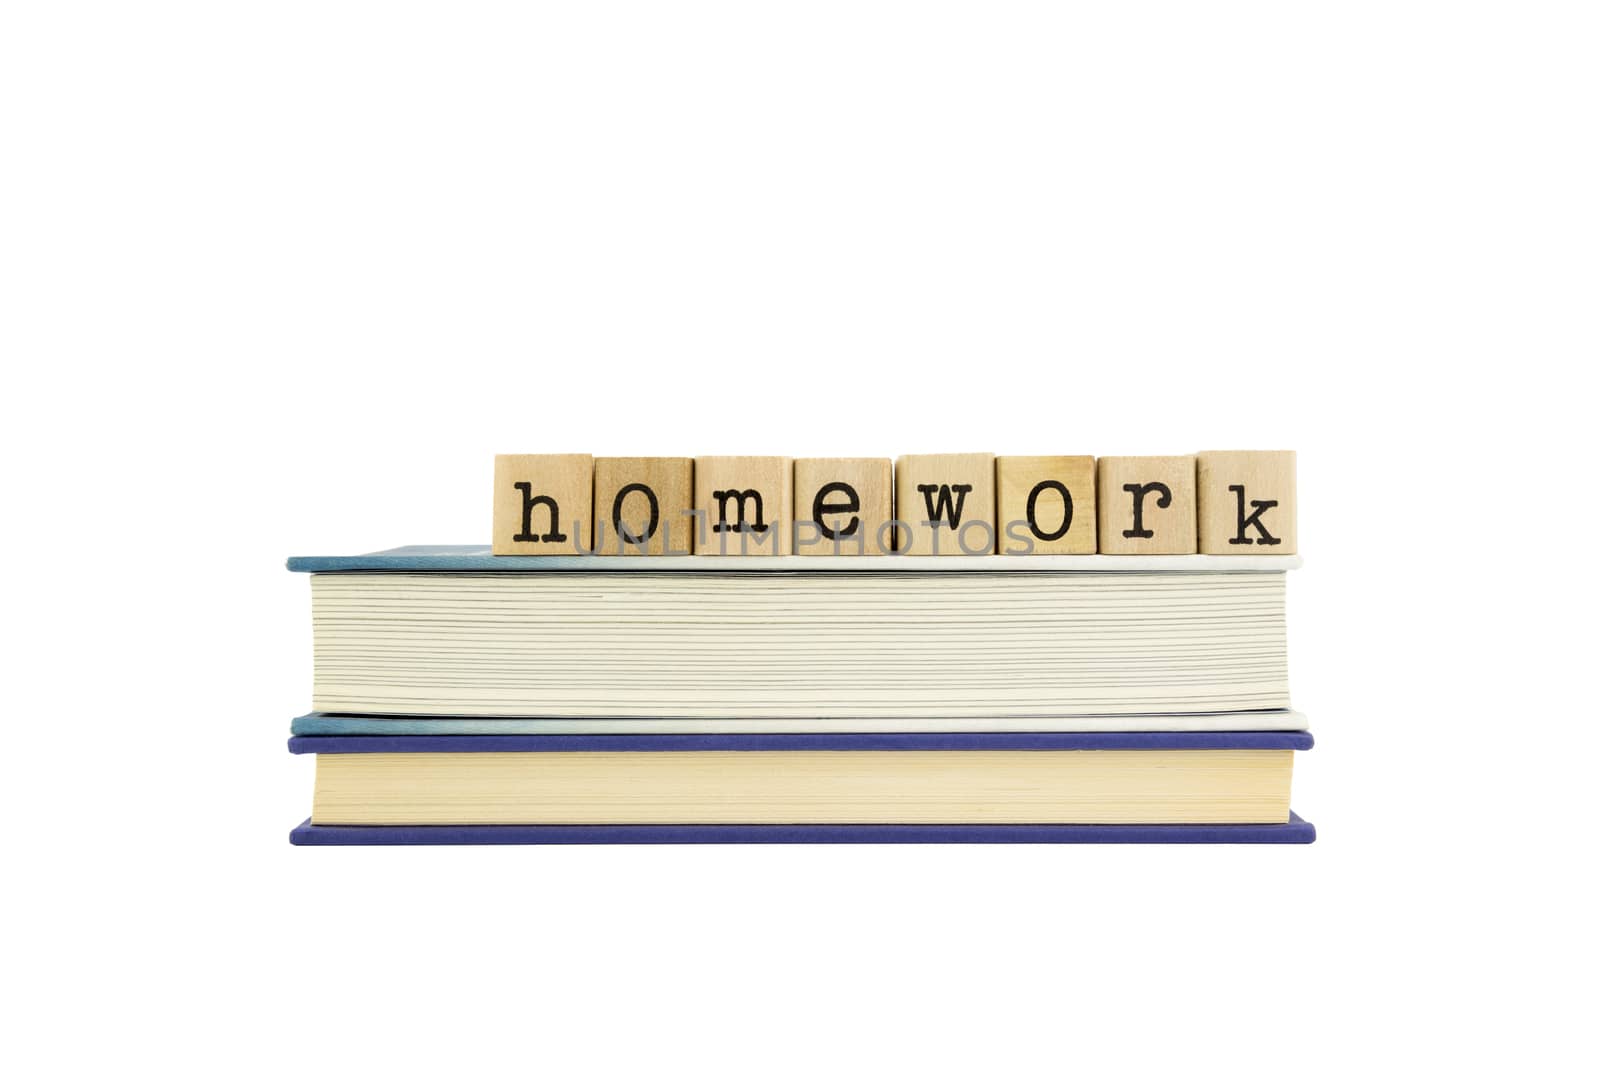 homework word on wood stamps and books by vinnstock